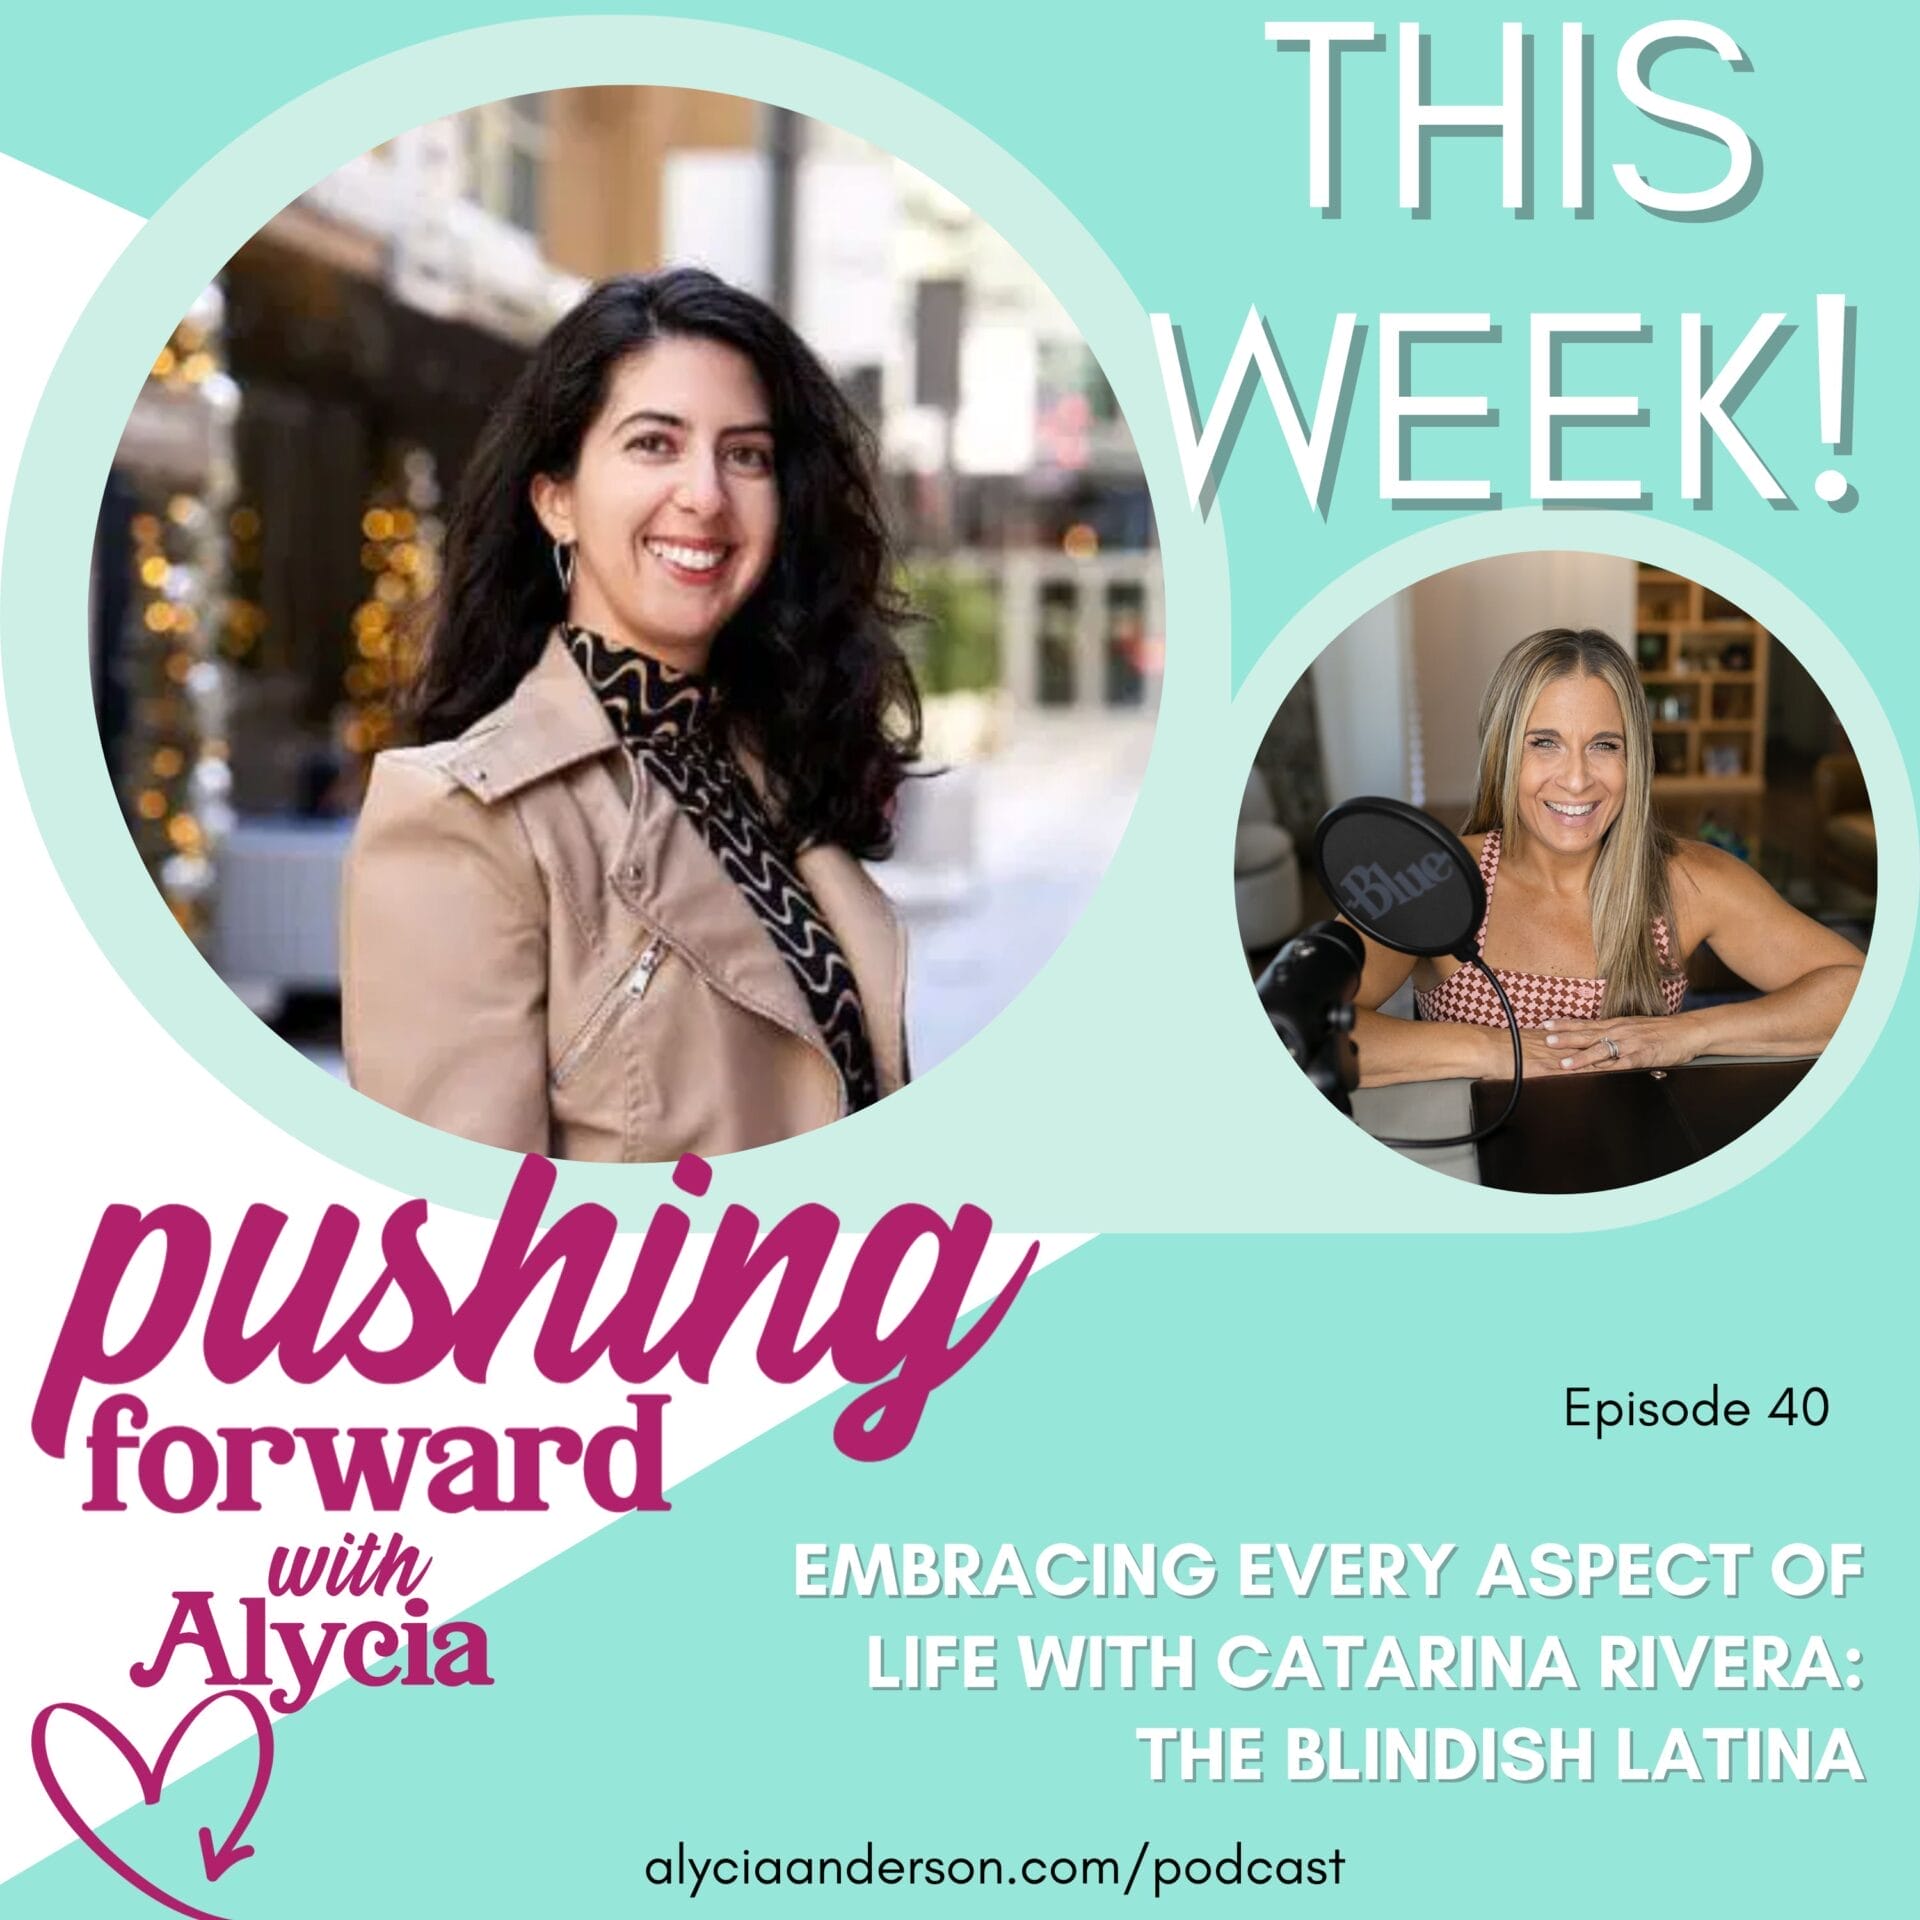 embracing every aspect of life with catarina rivera the blindish latina on pushing forward with alycia episode forty